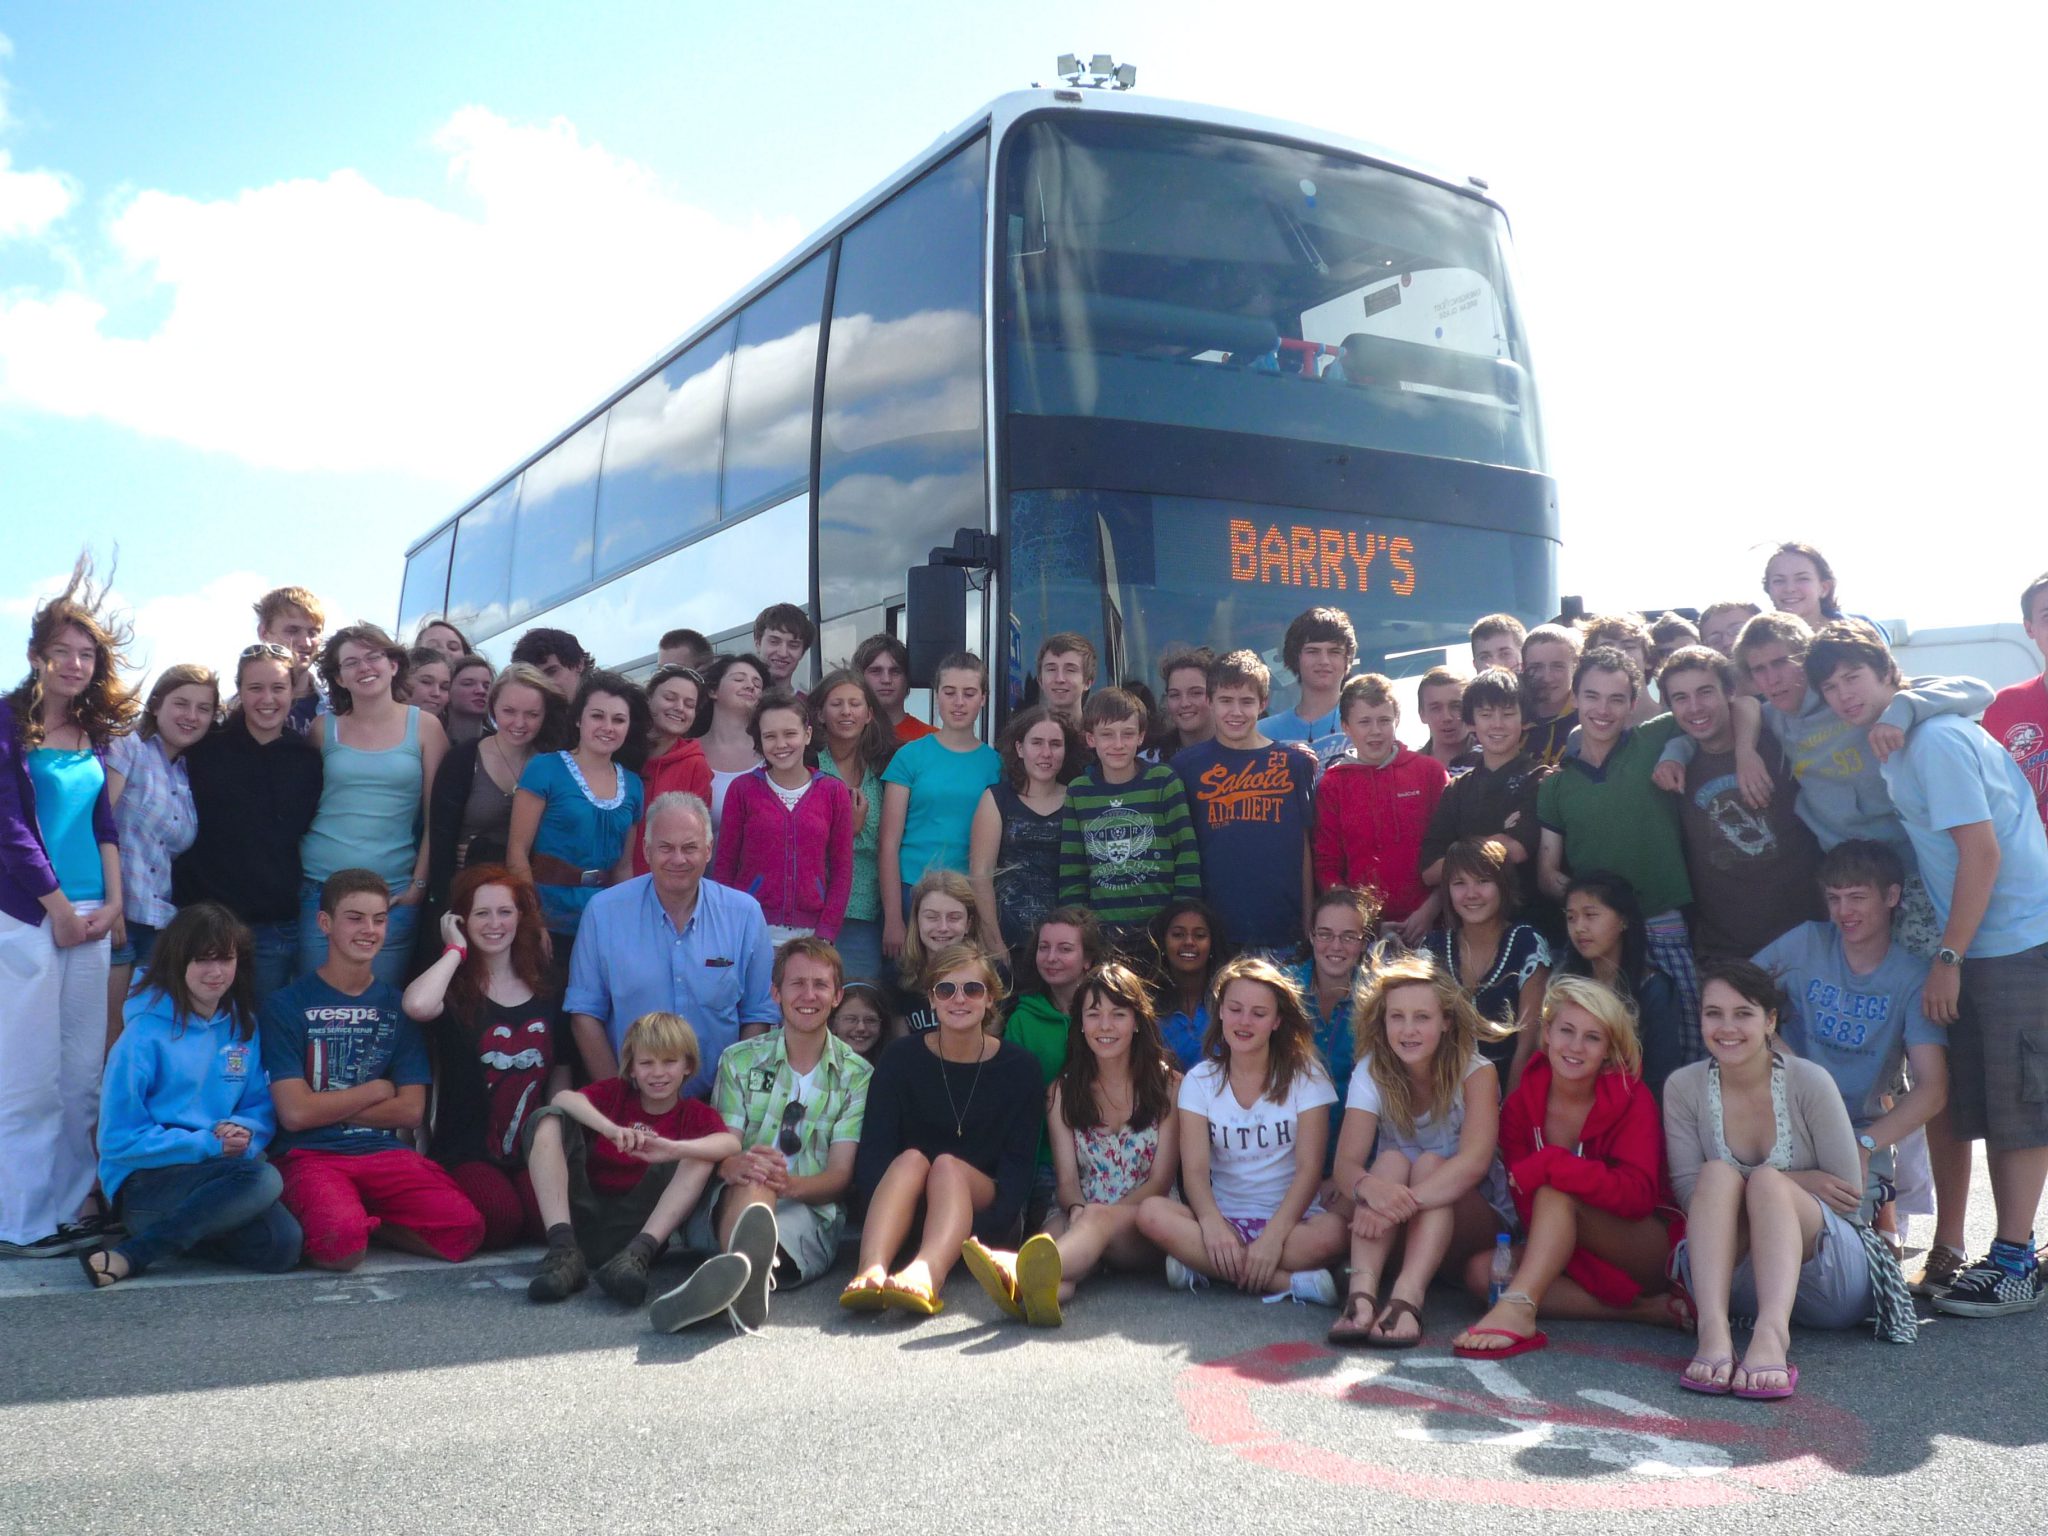 Wessex Youth Orchestra with Roy of Rayburn (!) at Calais